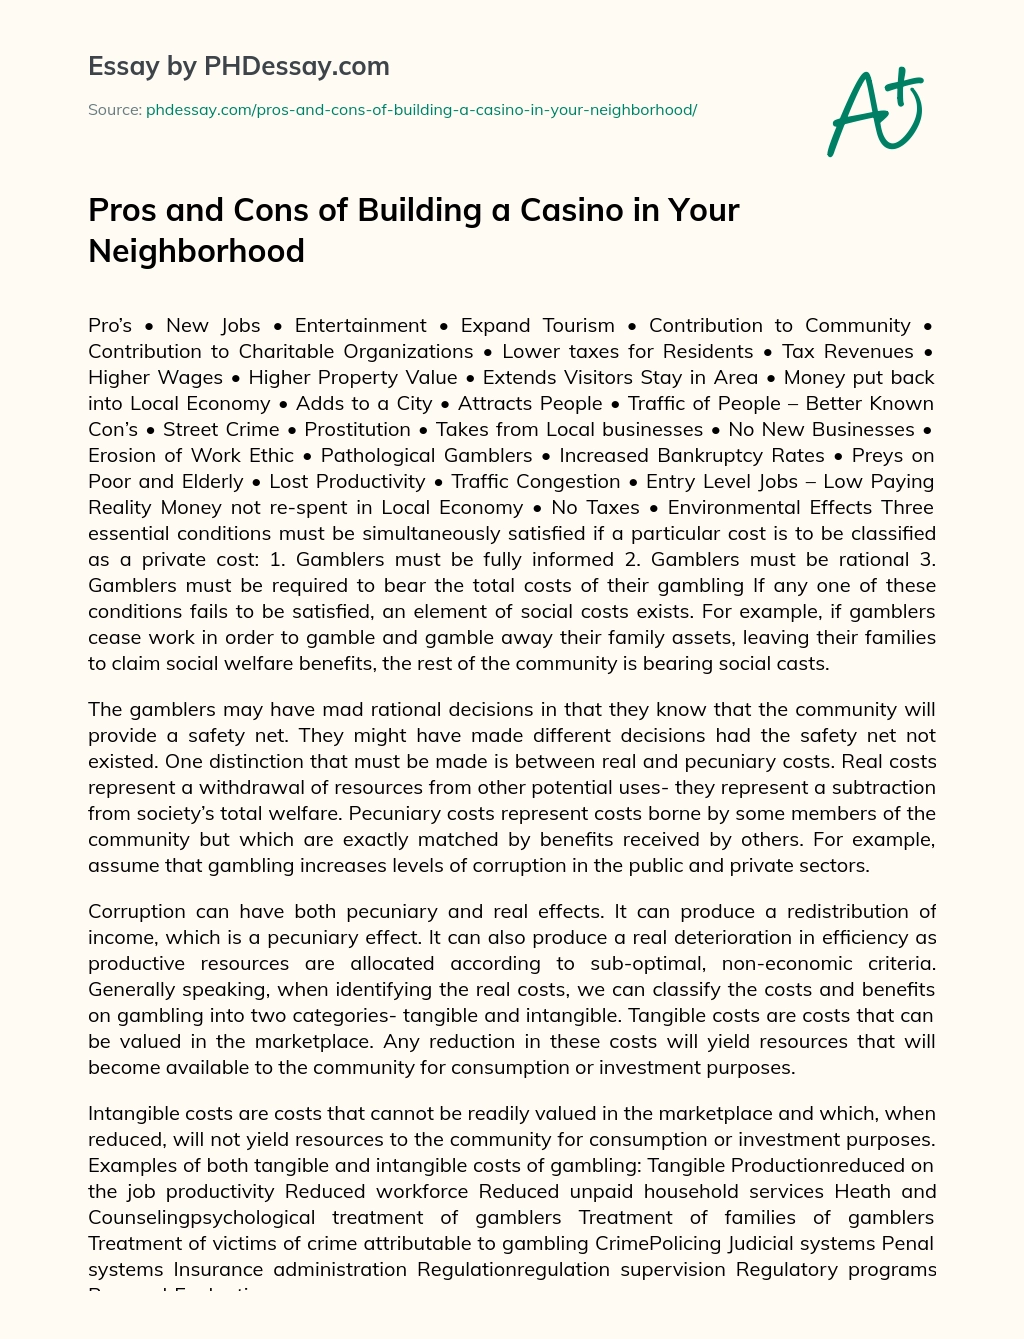 Pros and Cons of Building a Casino in Your Neighborhood essay